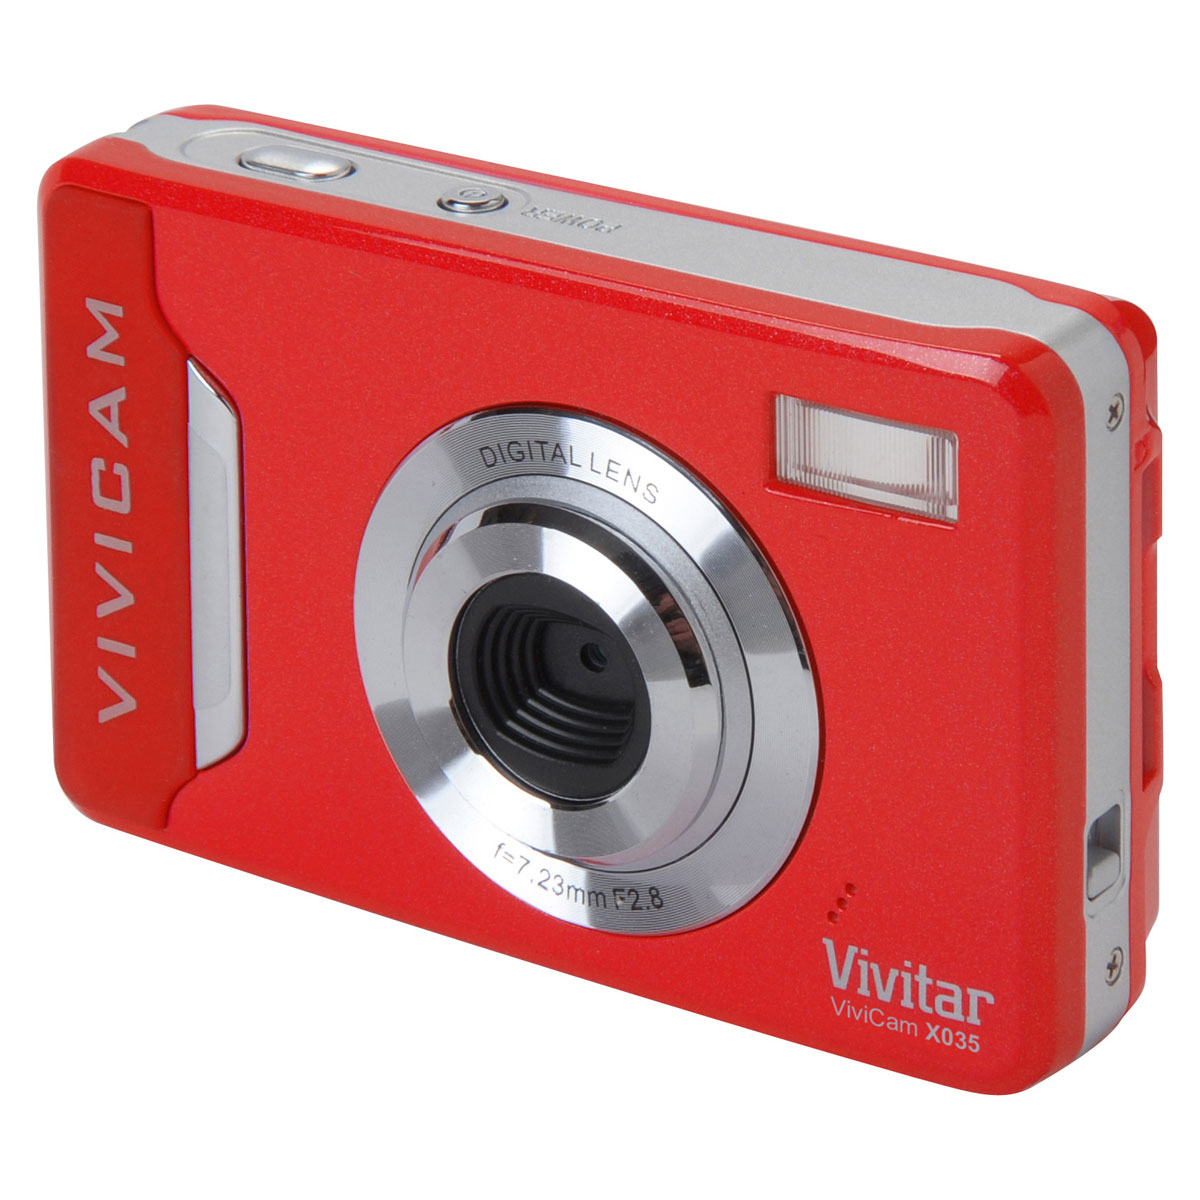 vivitar experience image manager vivicam 54 troubleshooting